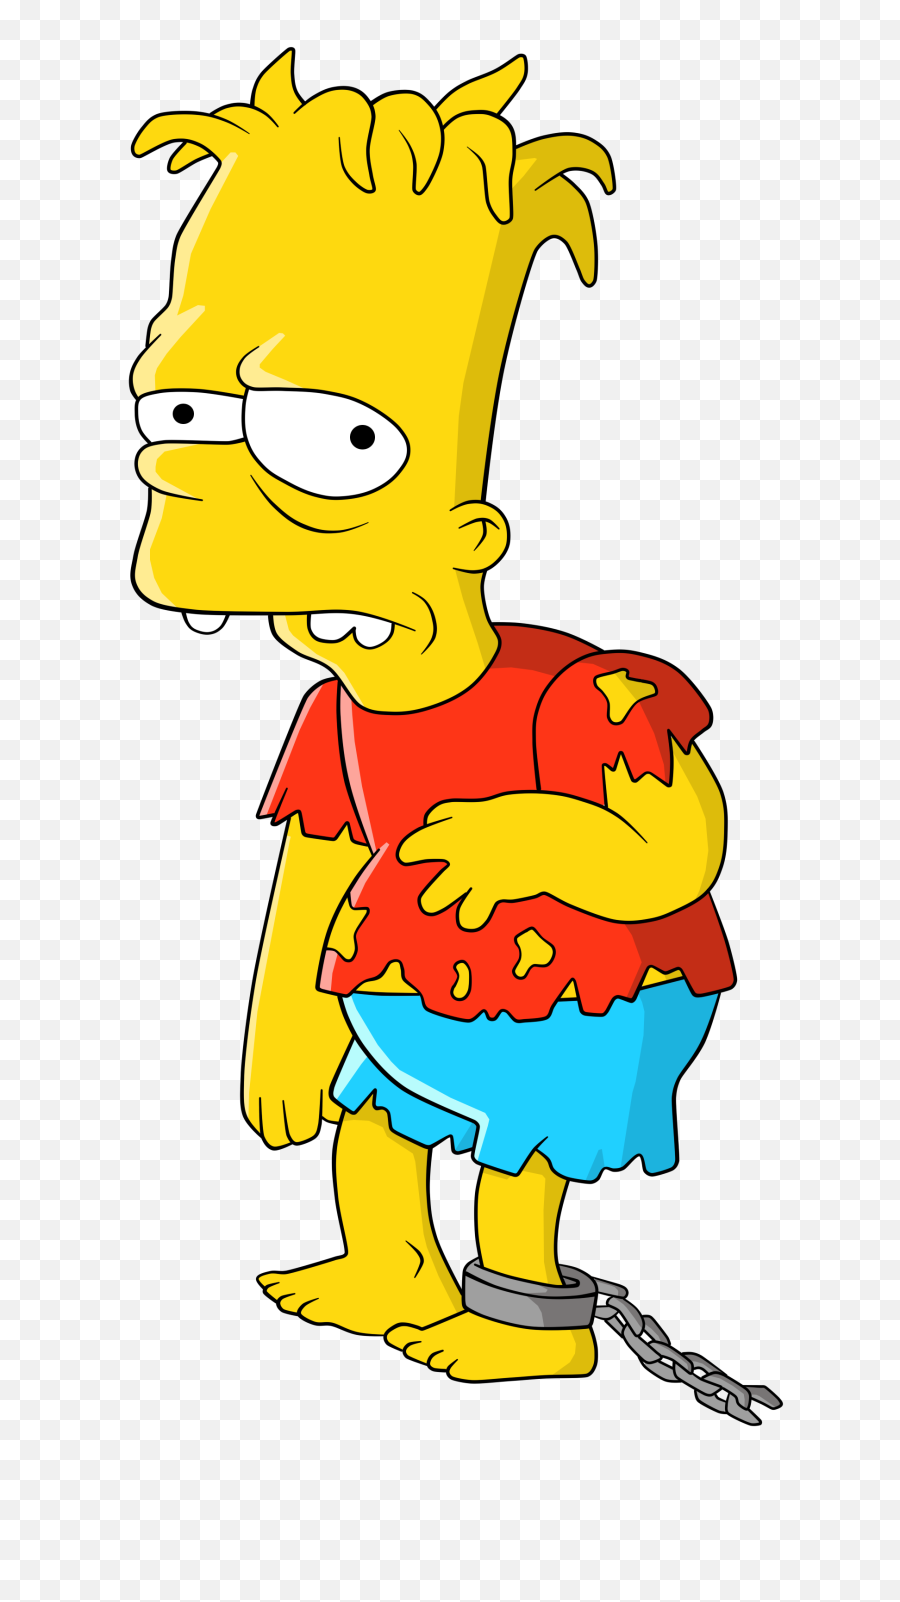 Png Image With Transparent Background - Hugo Simpson,The Simpsons Png